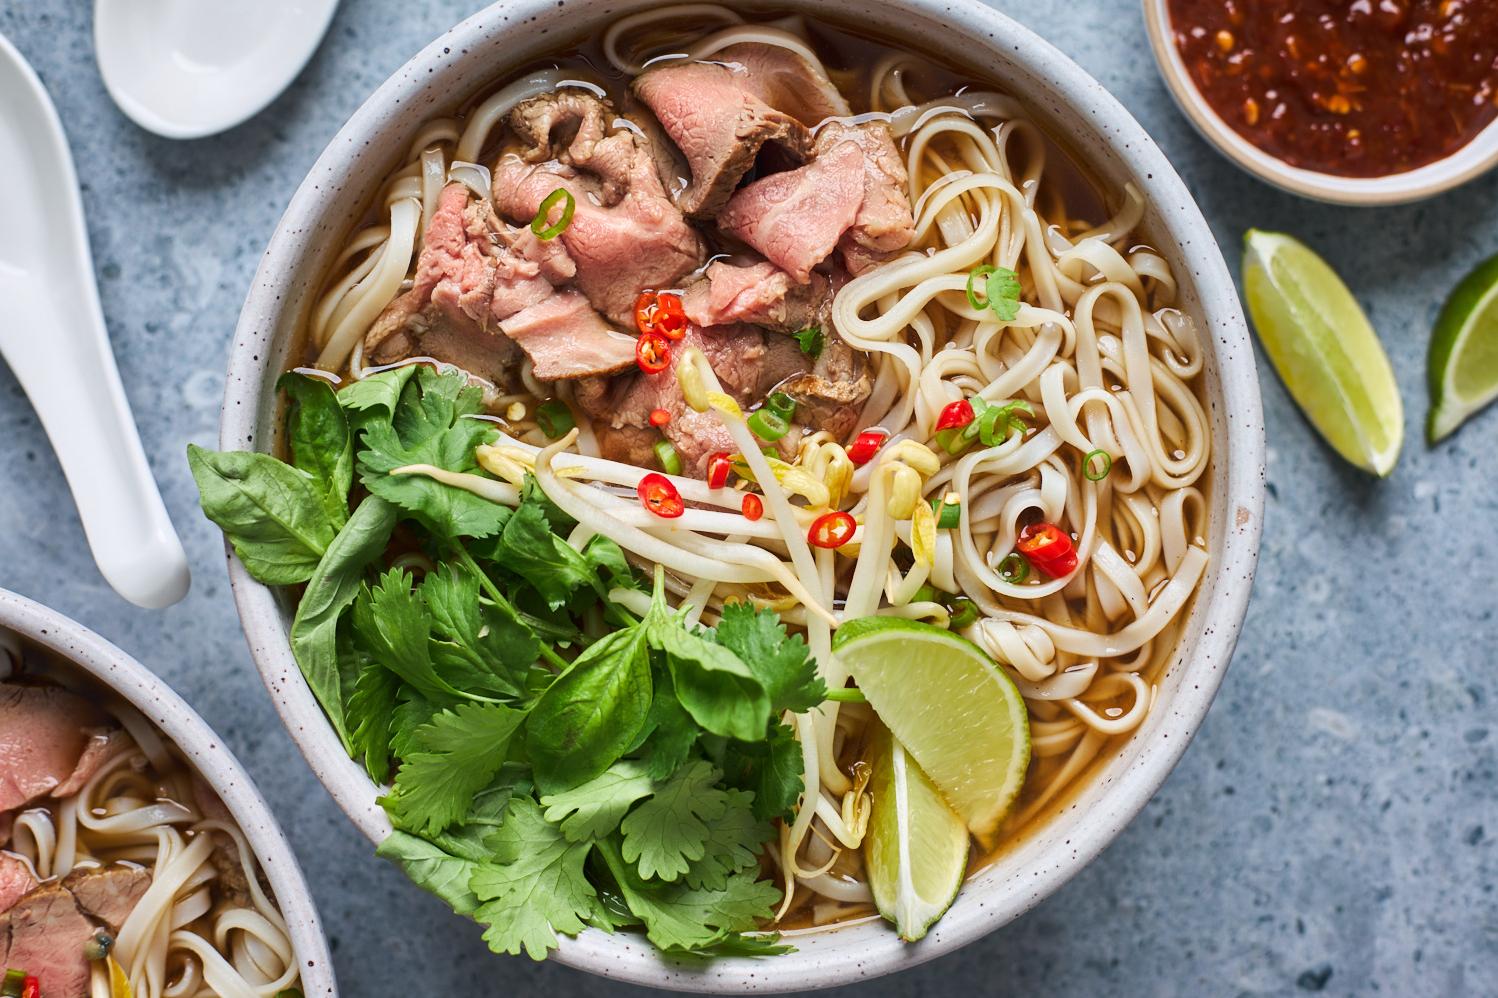  Transform your kitchen into a pho-nomenal culinary experience.